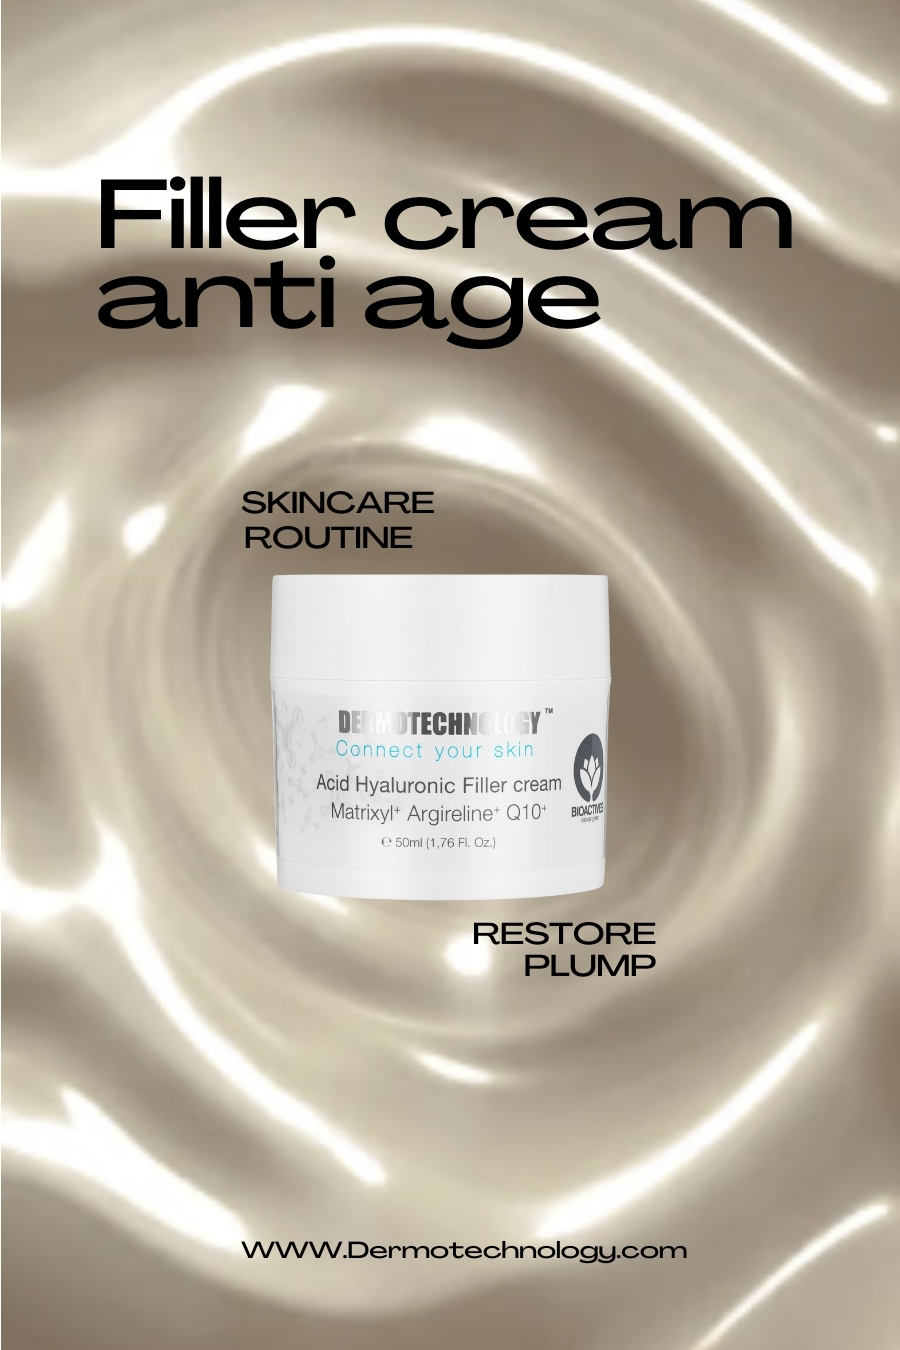 Dermotechnology Hyaluronic Acid Filler Cream container focused on anti-aging with a swirling silk background, emphasizing skin restoration and plumpness.